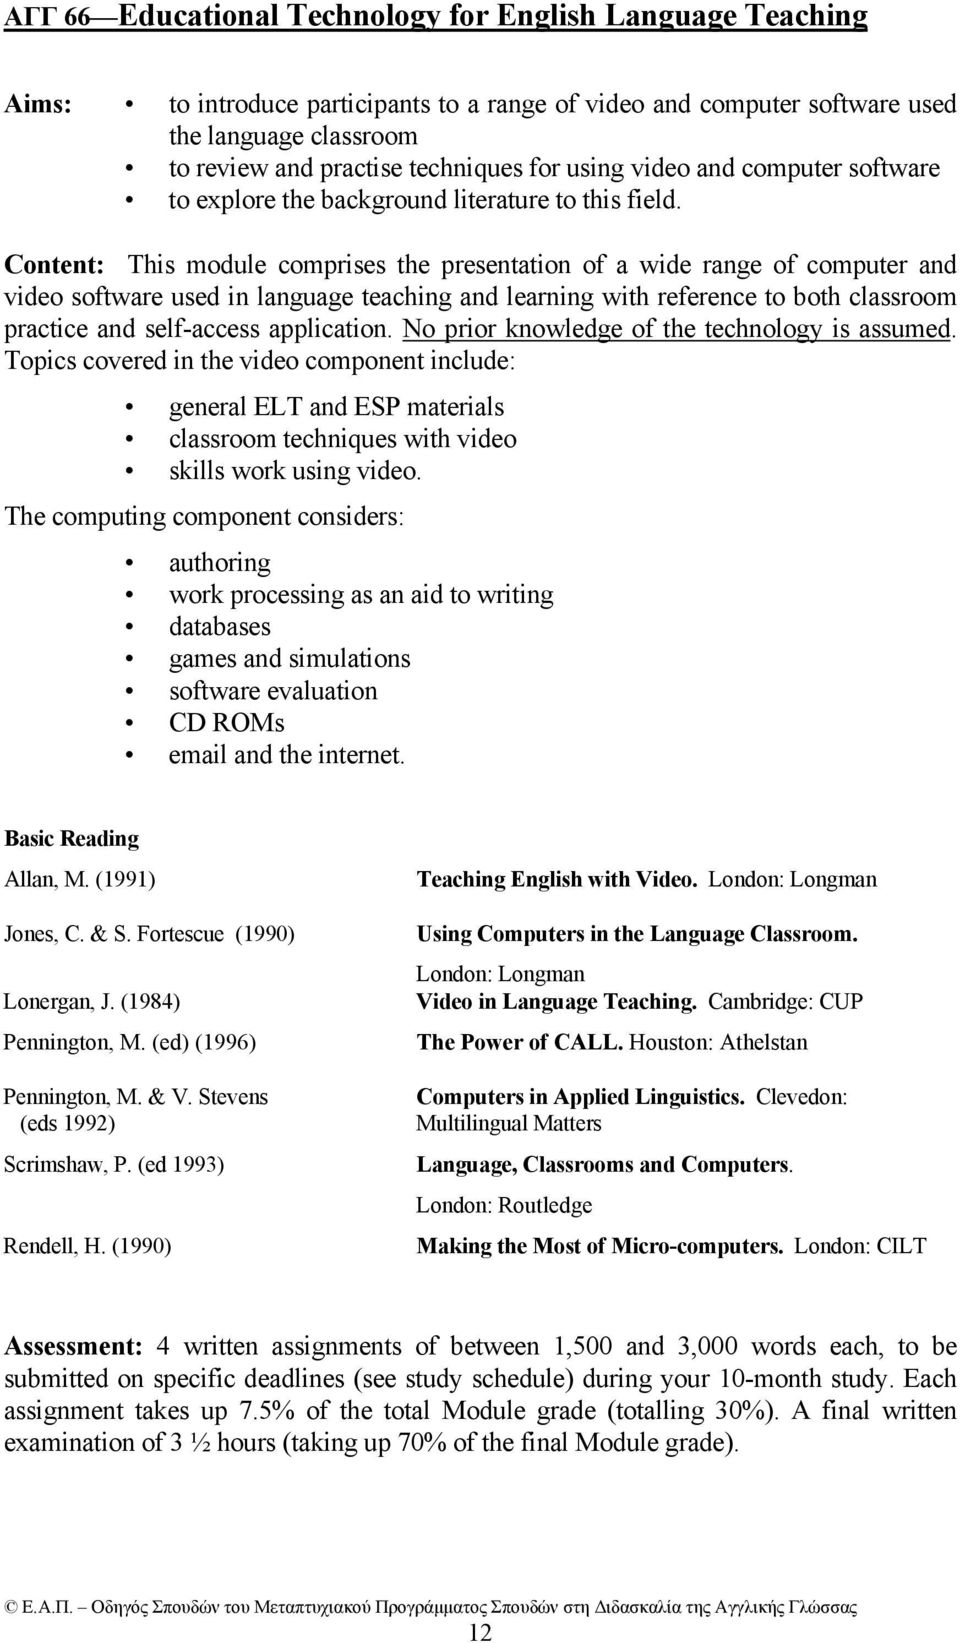 Content: This module comprises the presentation of a wide range of computer and video software used in language teaching and learning with reference to both classroom practice and self-access